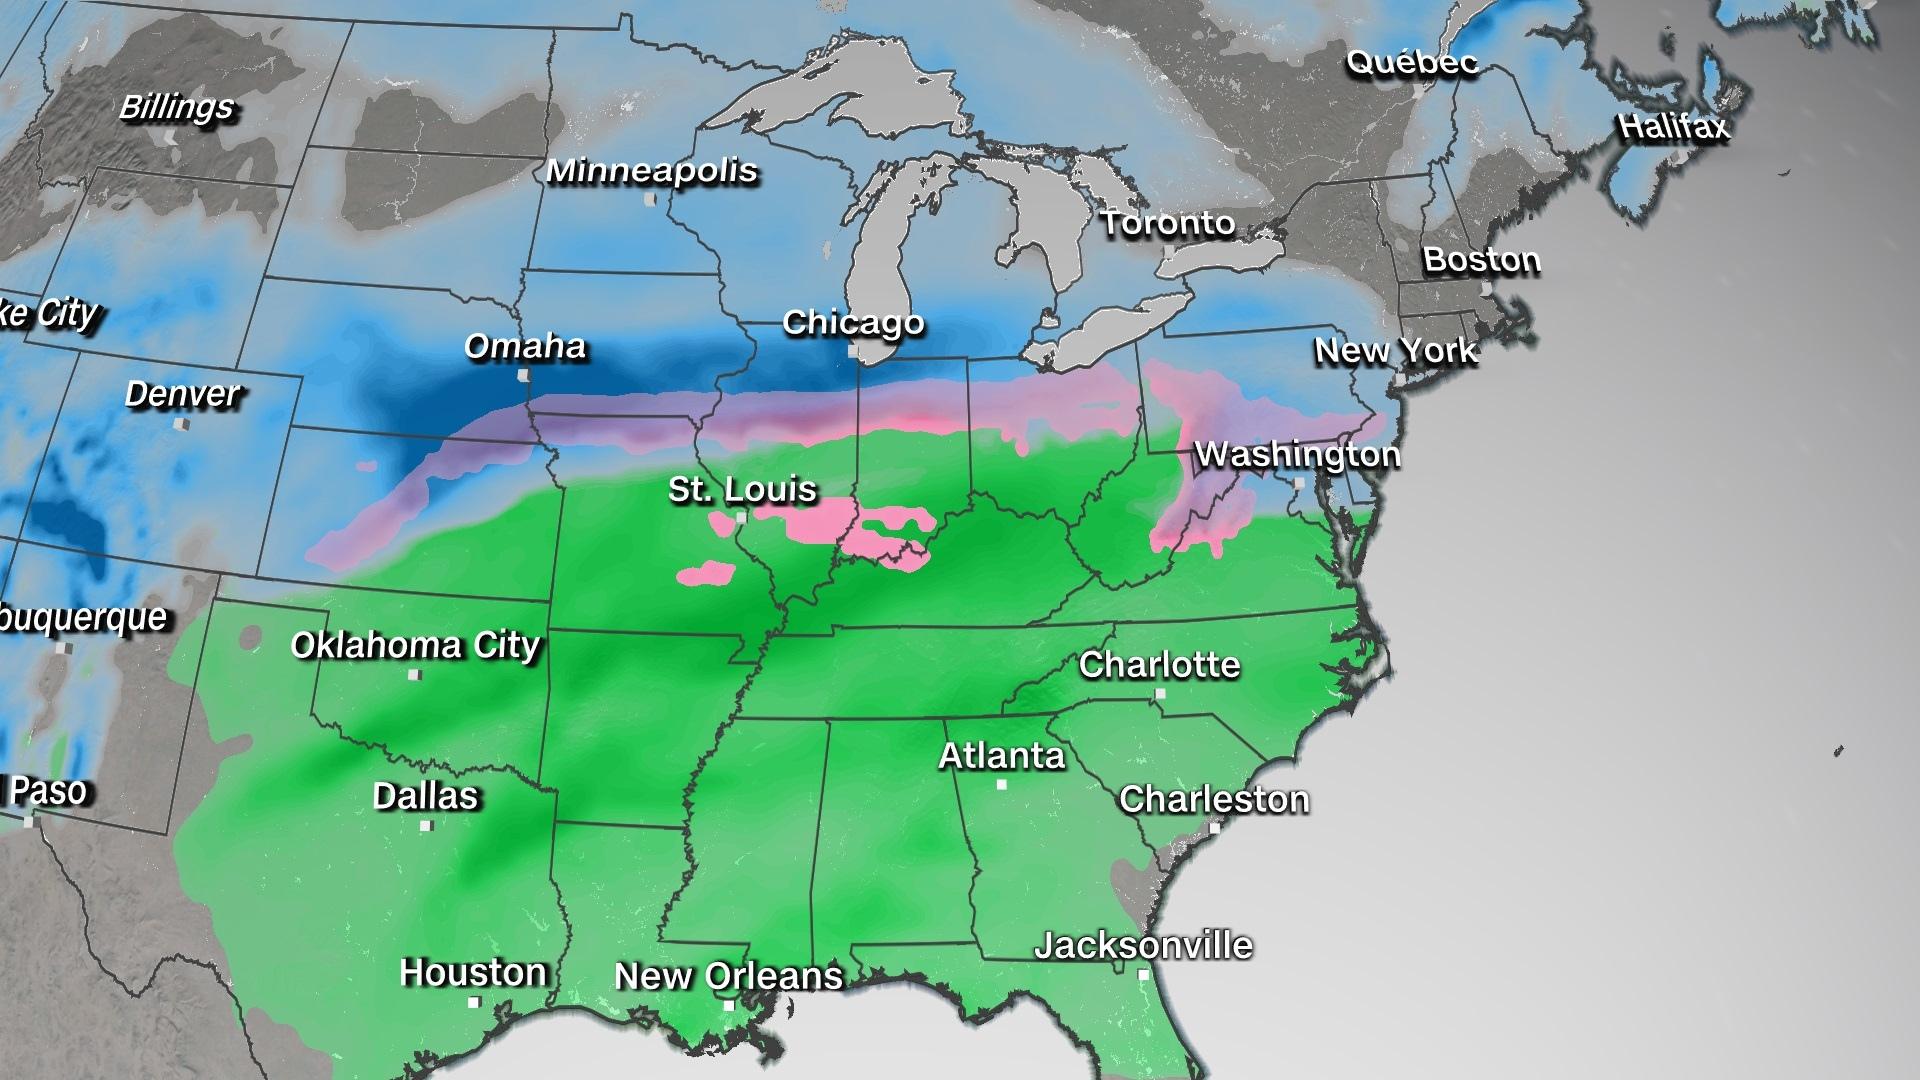 More than 25 million people are under winter weather alerts from California through Michigan. (CNN Weather)